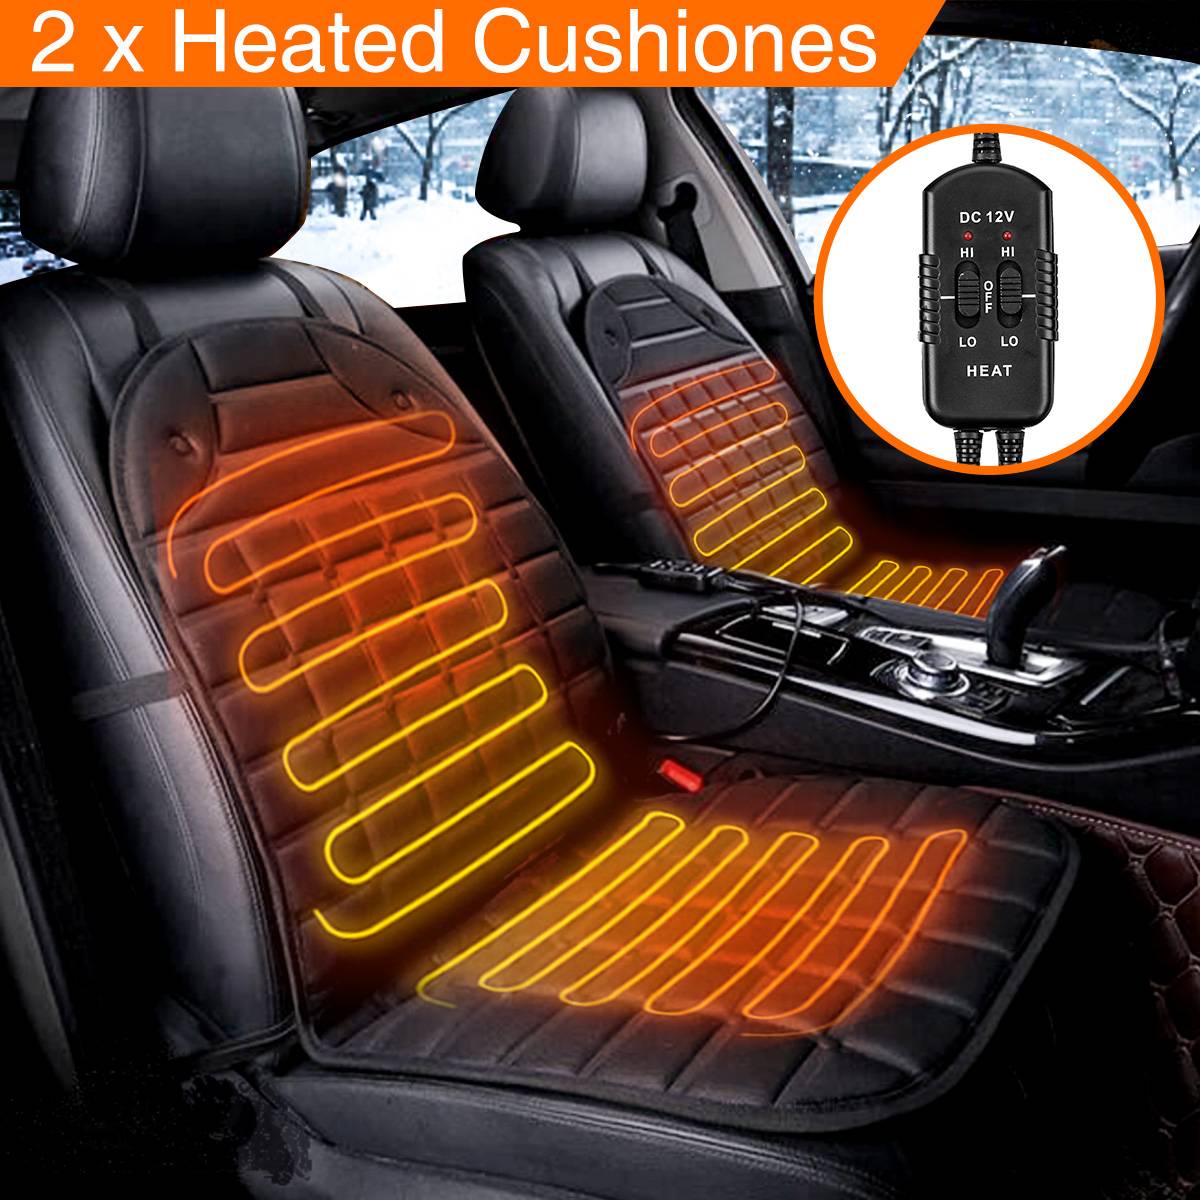 Thicken Plush Car Seat Cover Winter Warm Auto Front Seats Cushion